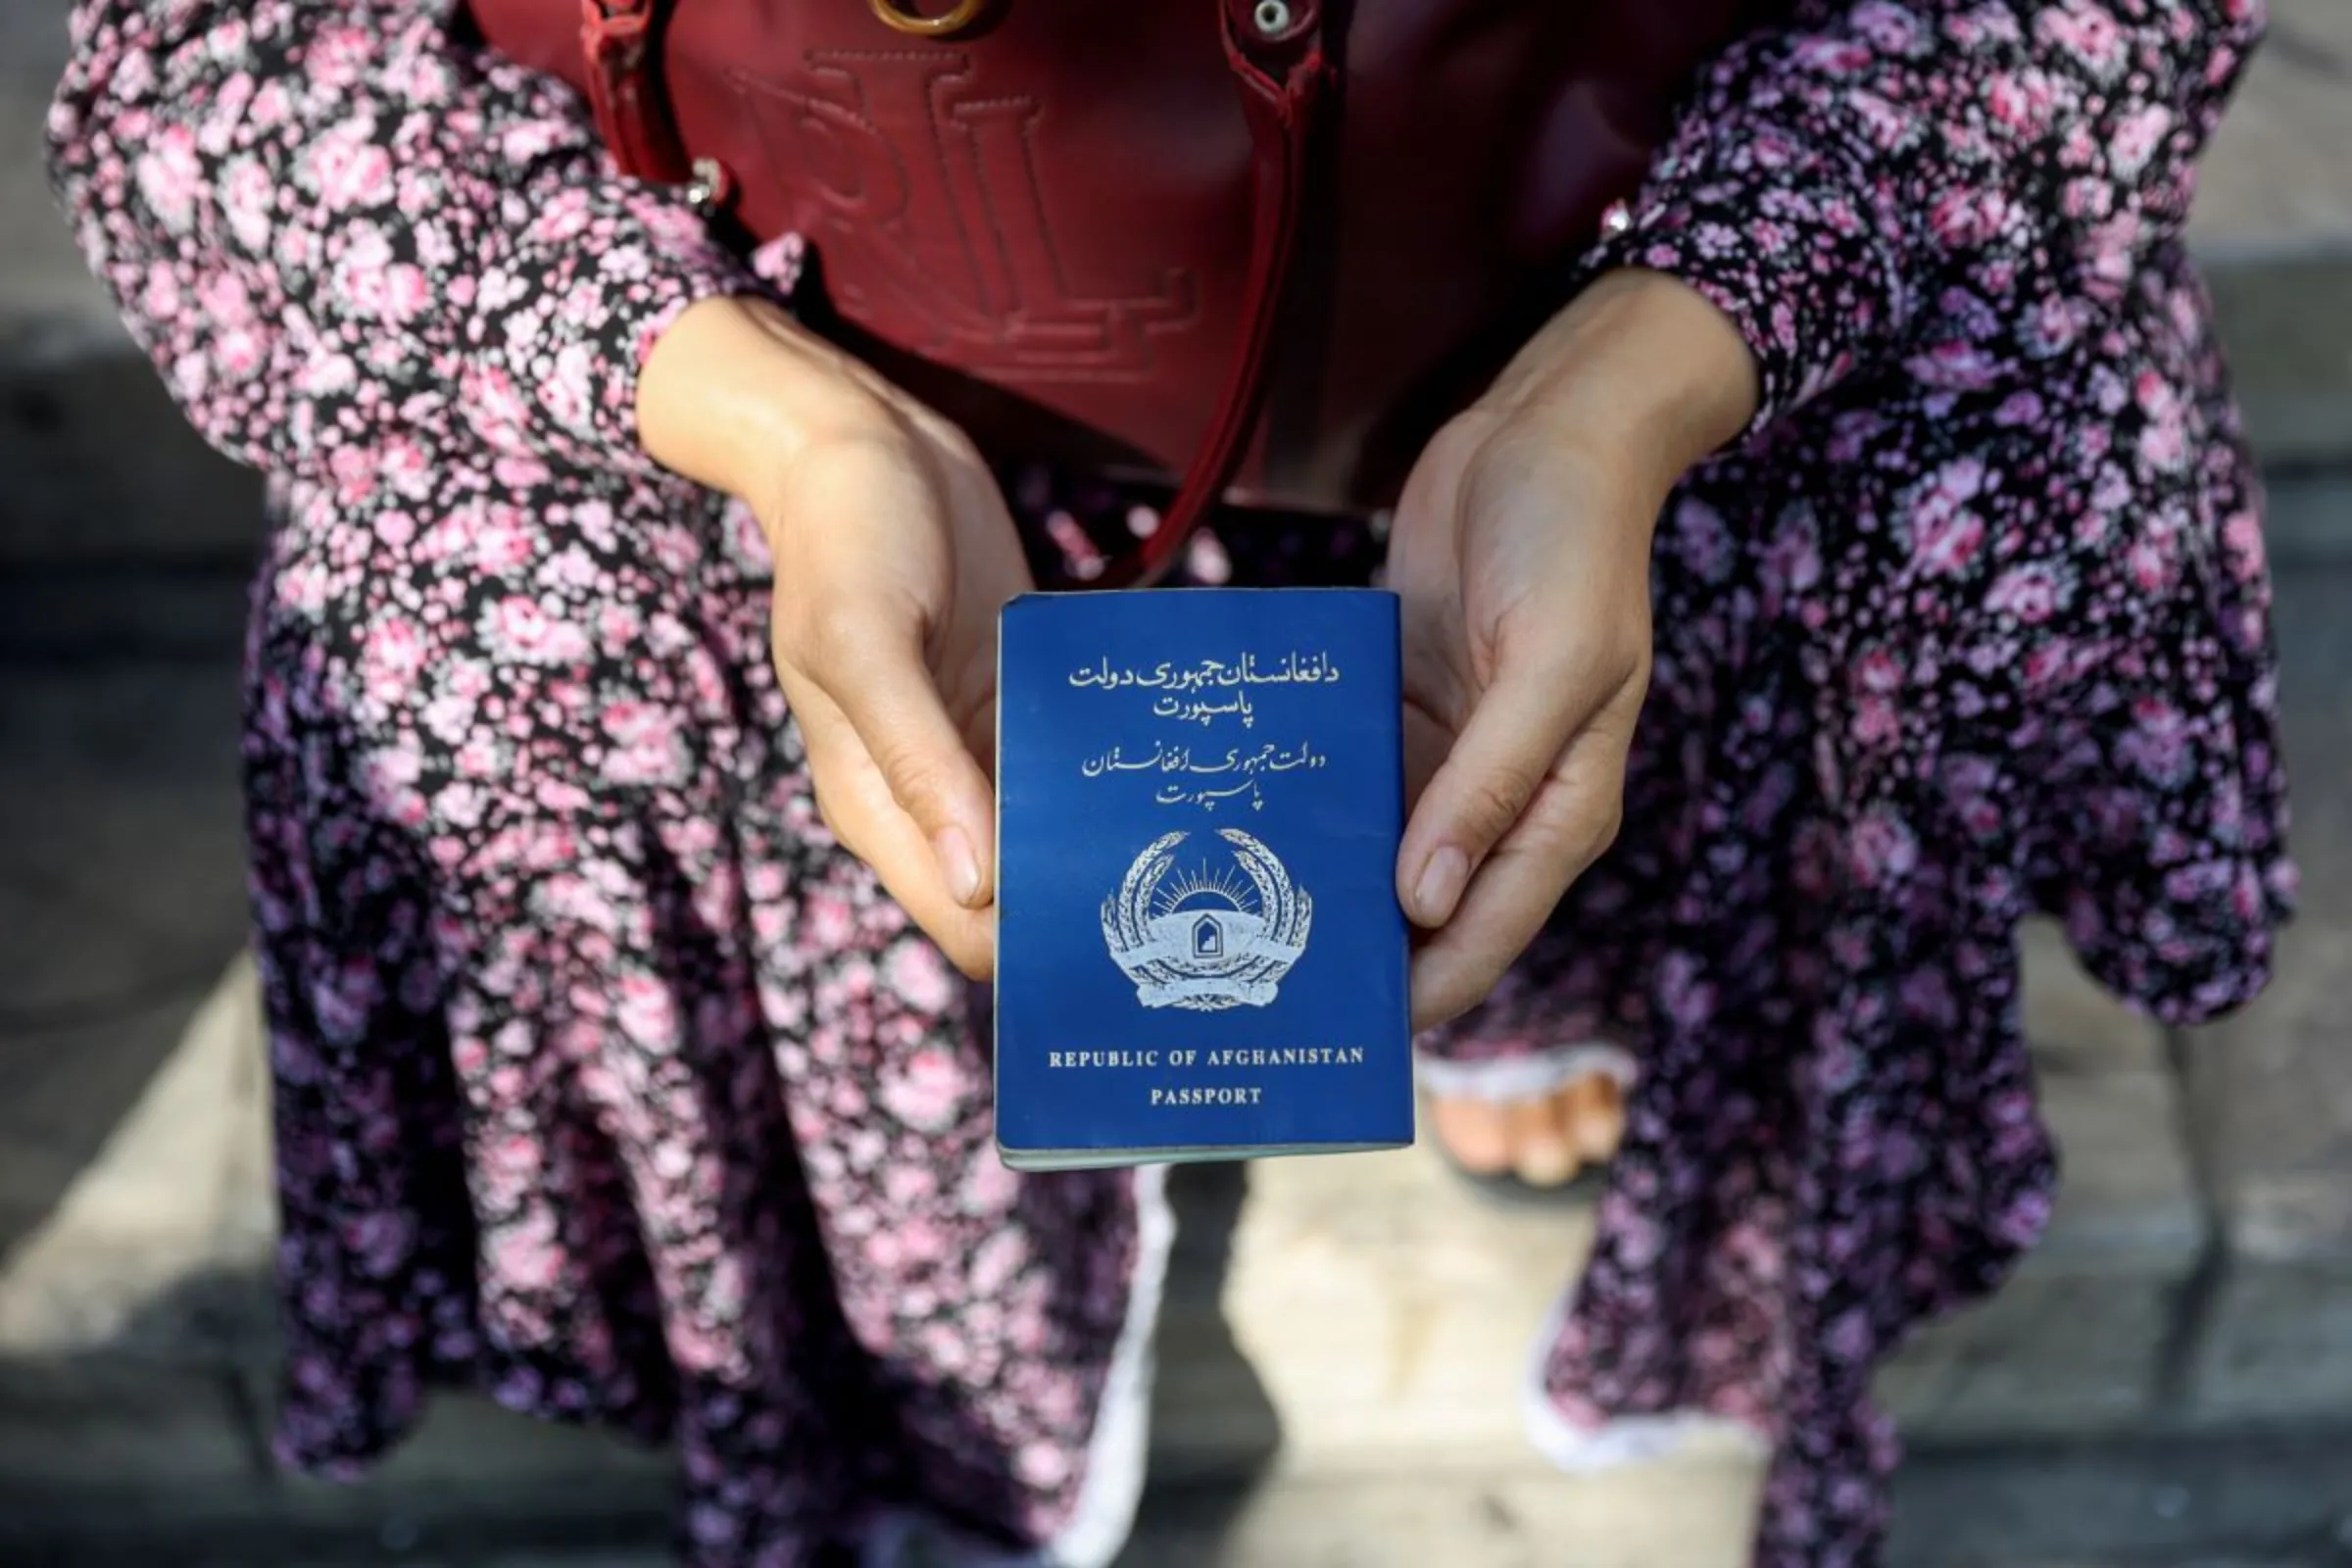 An Afghan refugee holds her passport in front of the German Embassy ​in a bid to acquire refugee visas from the European country, in Tehran, Iran September 1, 2021